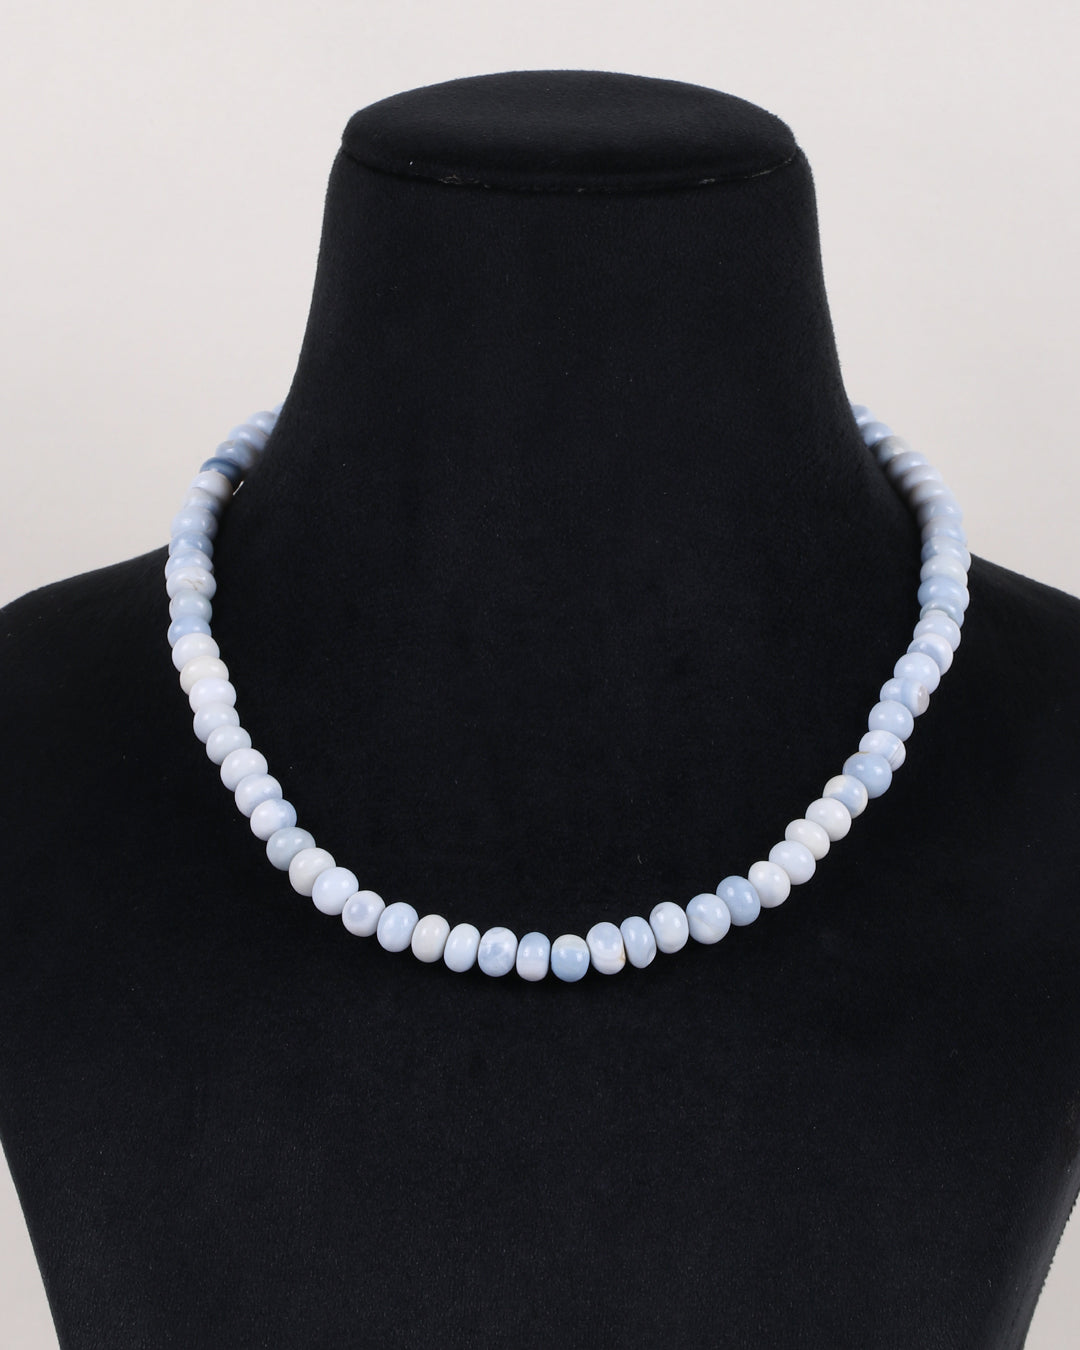 Blue Opal Gemstone Rondelle  Smooth Beads Necklace Jewelry